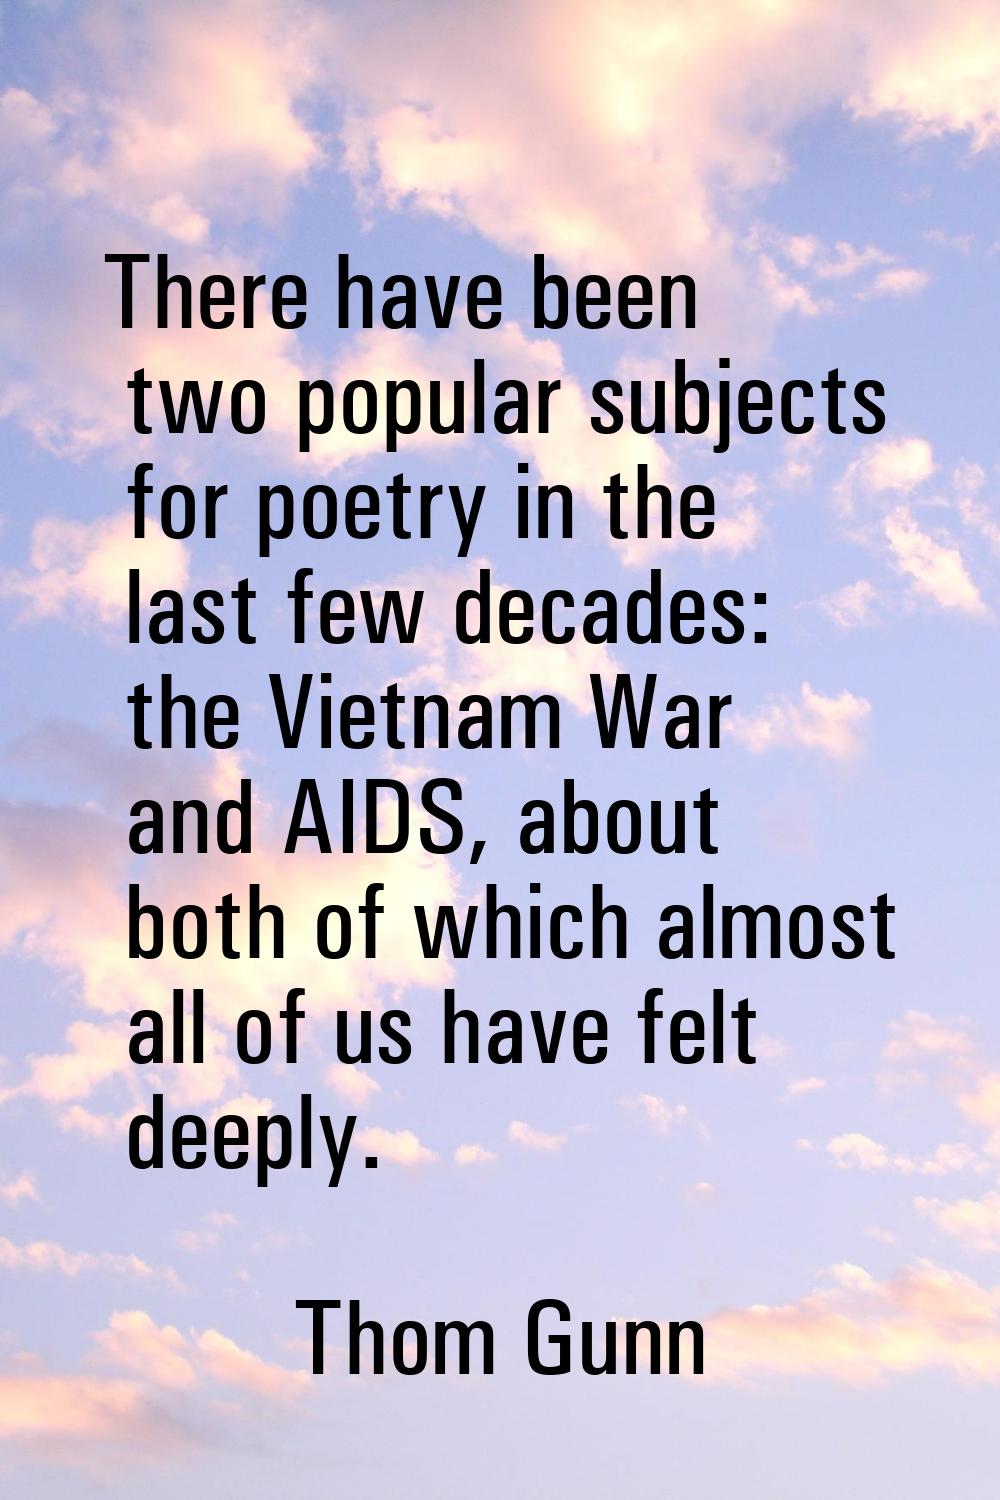 There have been two popular subjects for poetry in the last few decades: the Vietnam War and AIDS, 